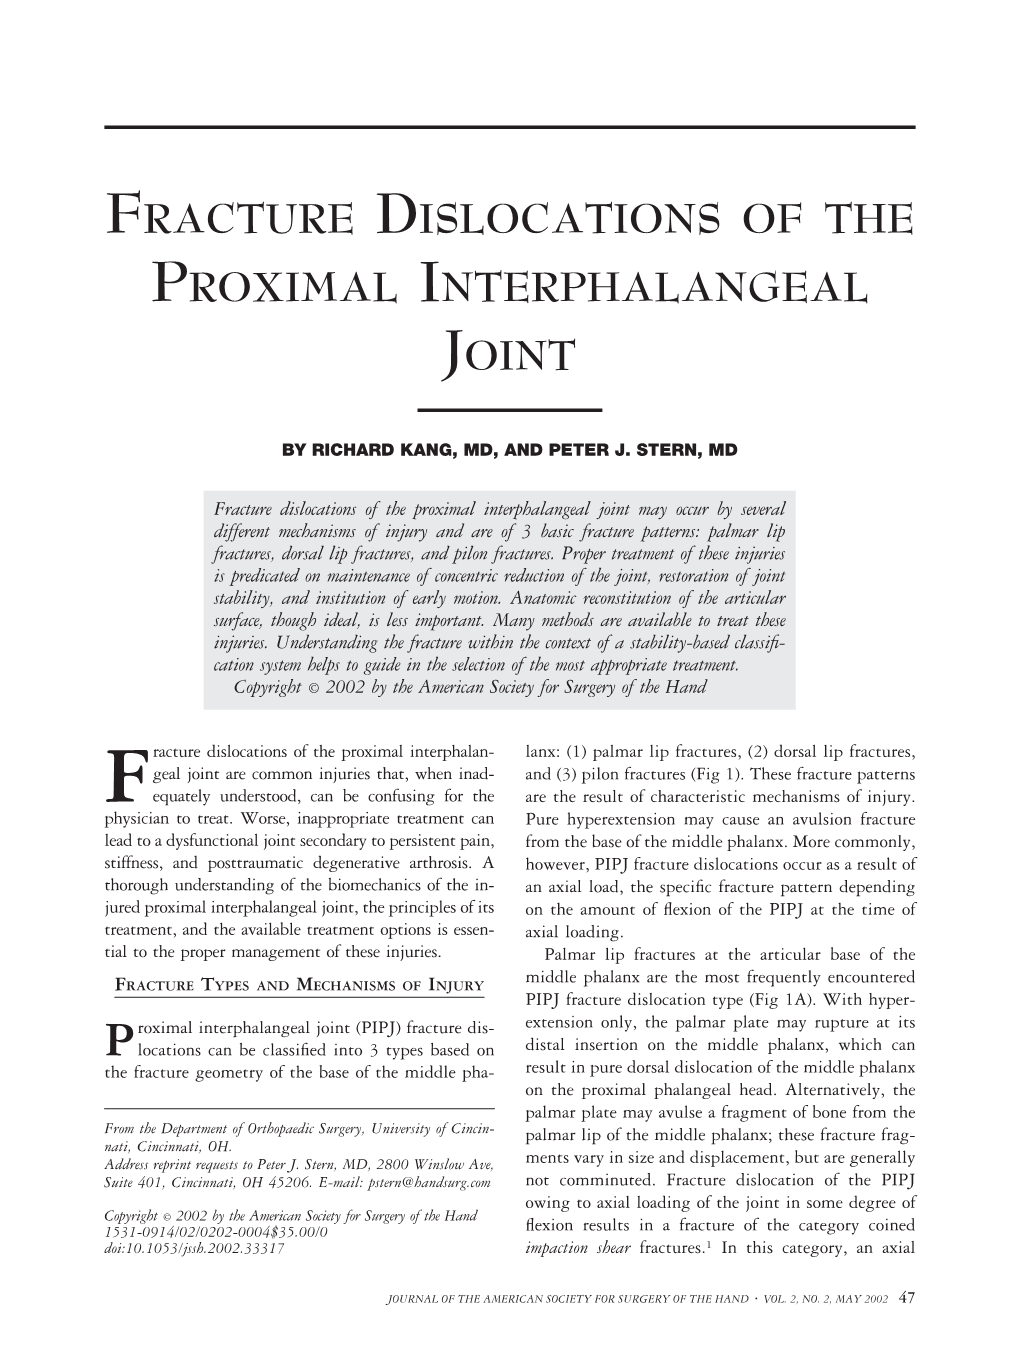 Fracture Dislocations of the Proximal Interphalangeal Joint